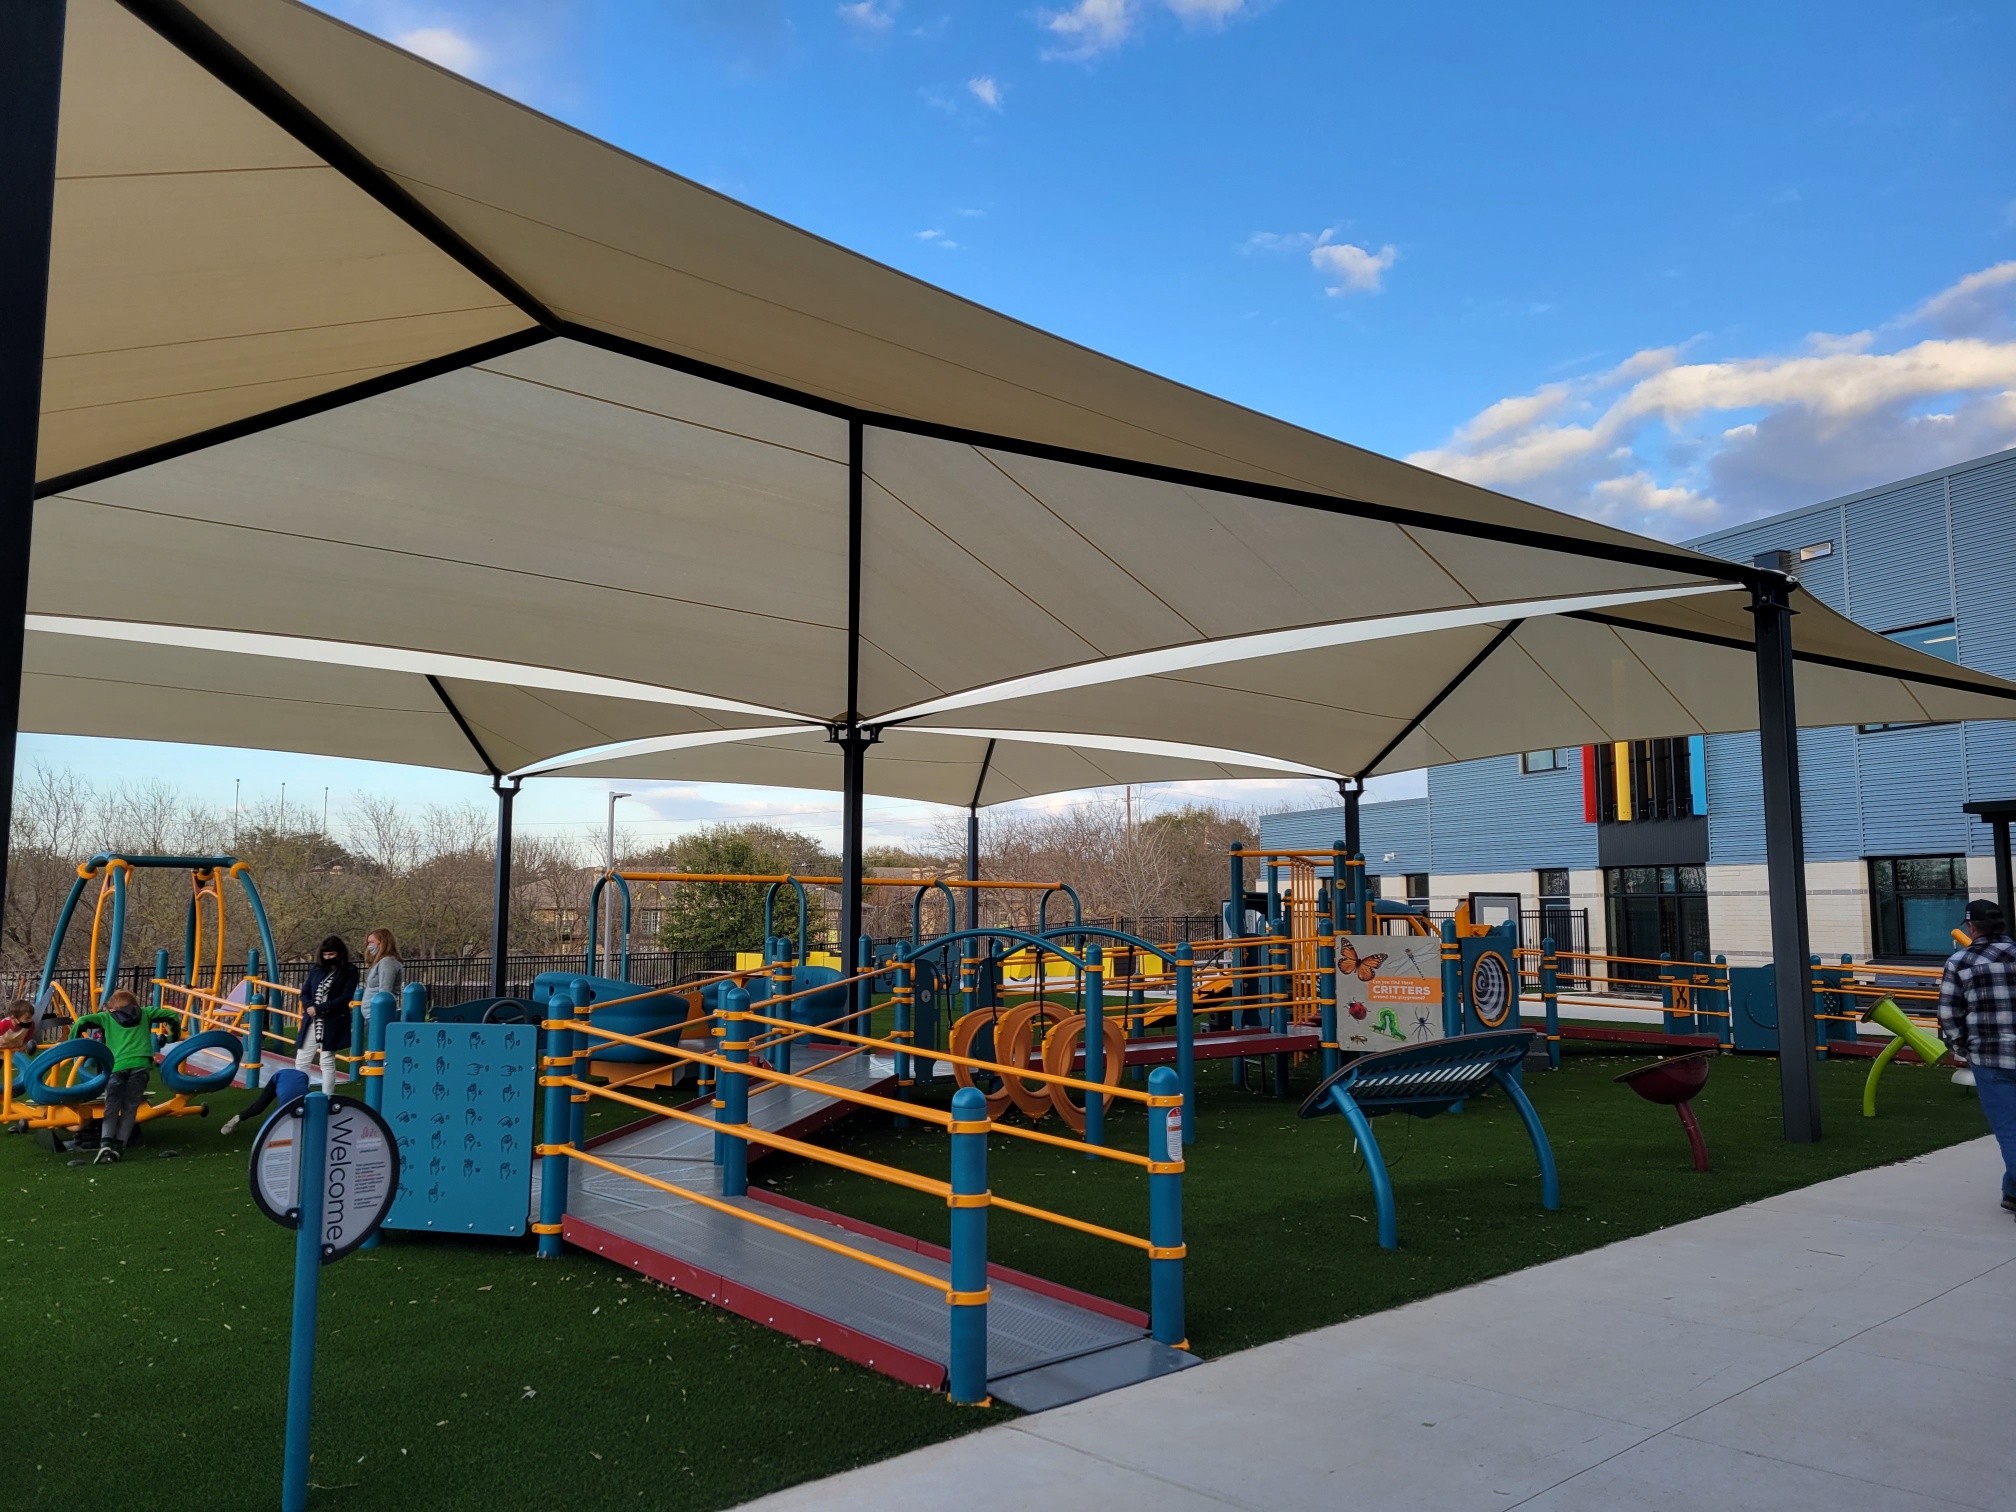 Rosedale School's inclusive playground fosters accessibility and joy for students with special needs, promoting inclusivity within the community.